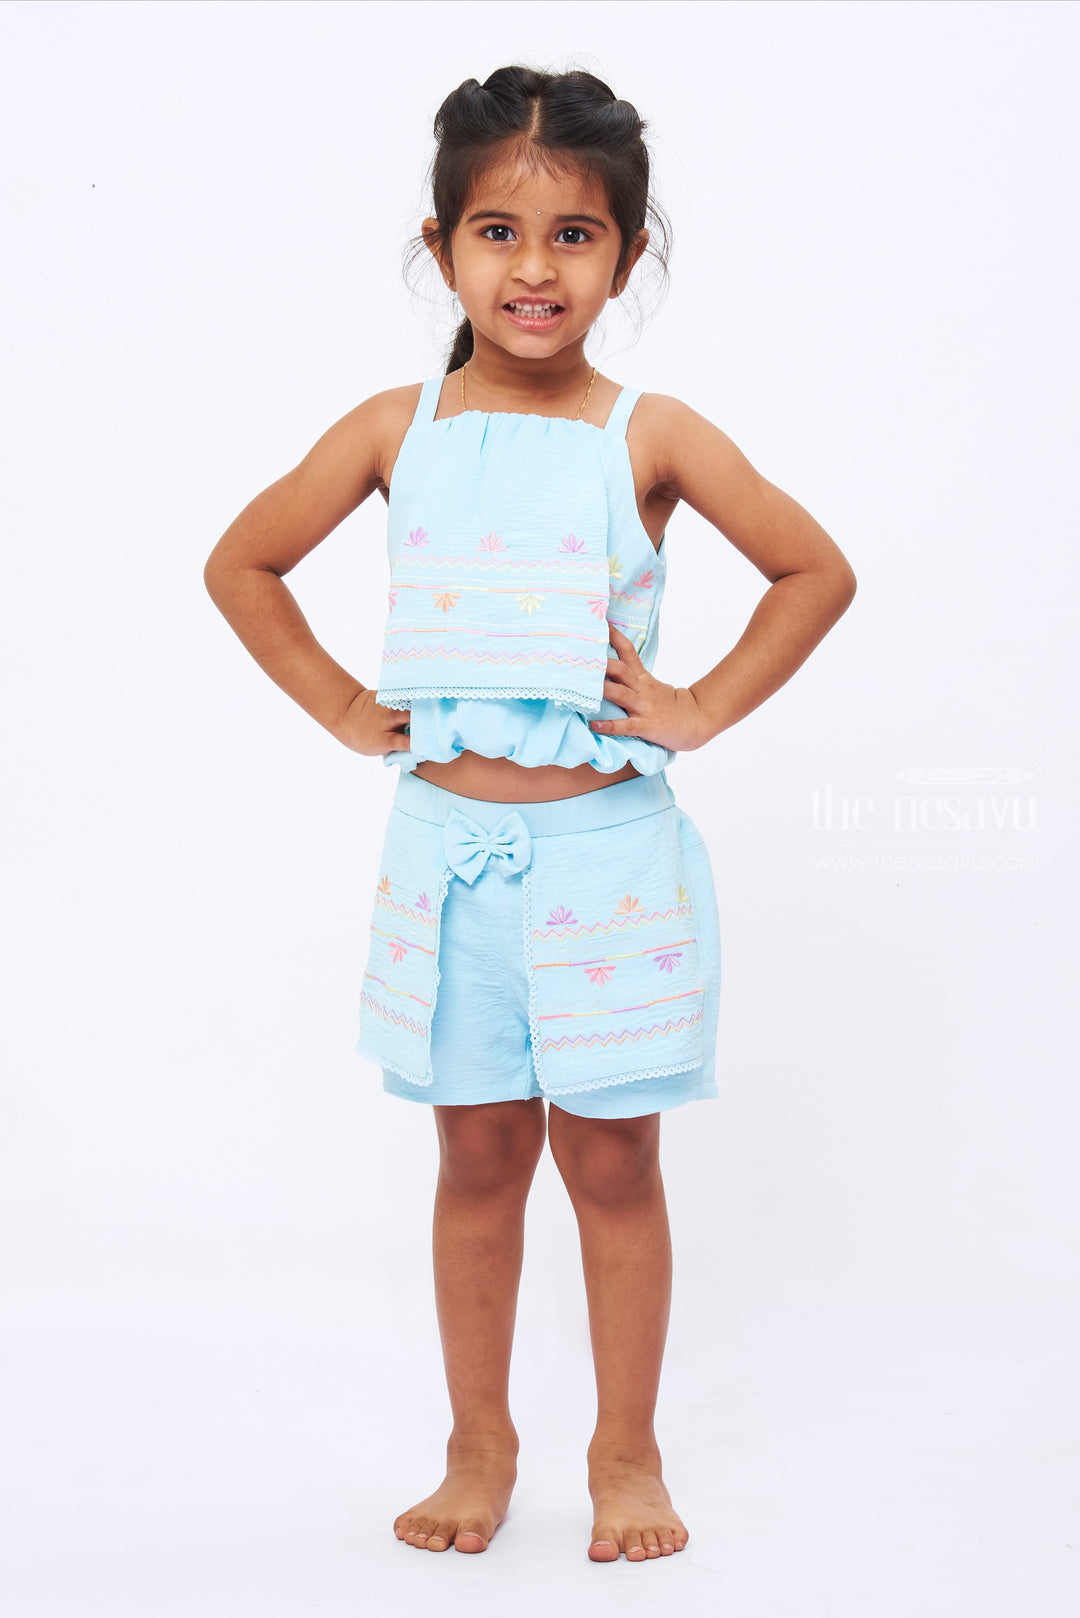 The Nesavu Baby Casual Sets Girls Breezy Floral Top and Shorts Set - Summer Delight in Soft Blue Nesavu 18 (2Y) / Blue BFJ511A-18 Embroidered Floral Top and Shorts Set for Girls | Soft Blue Summer Wear | The Nesavu